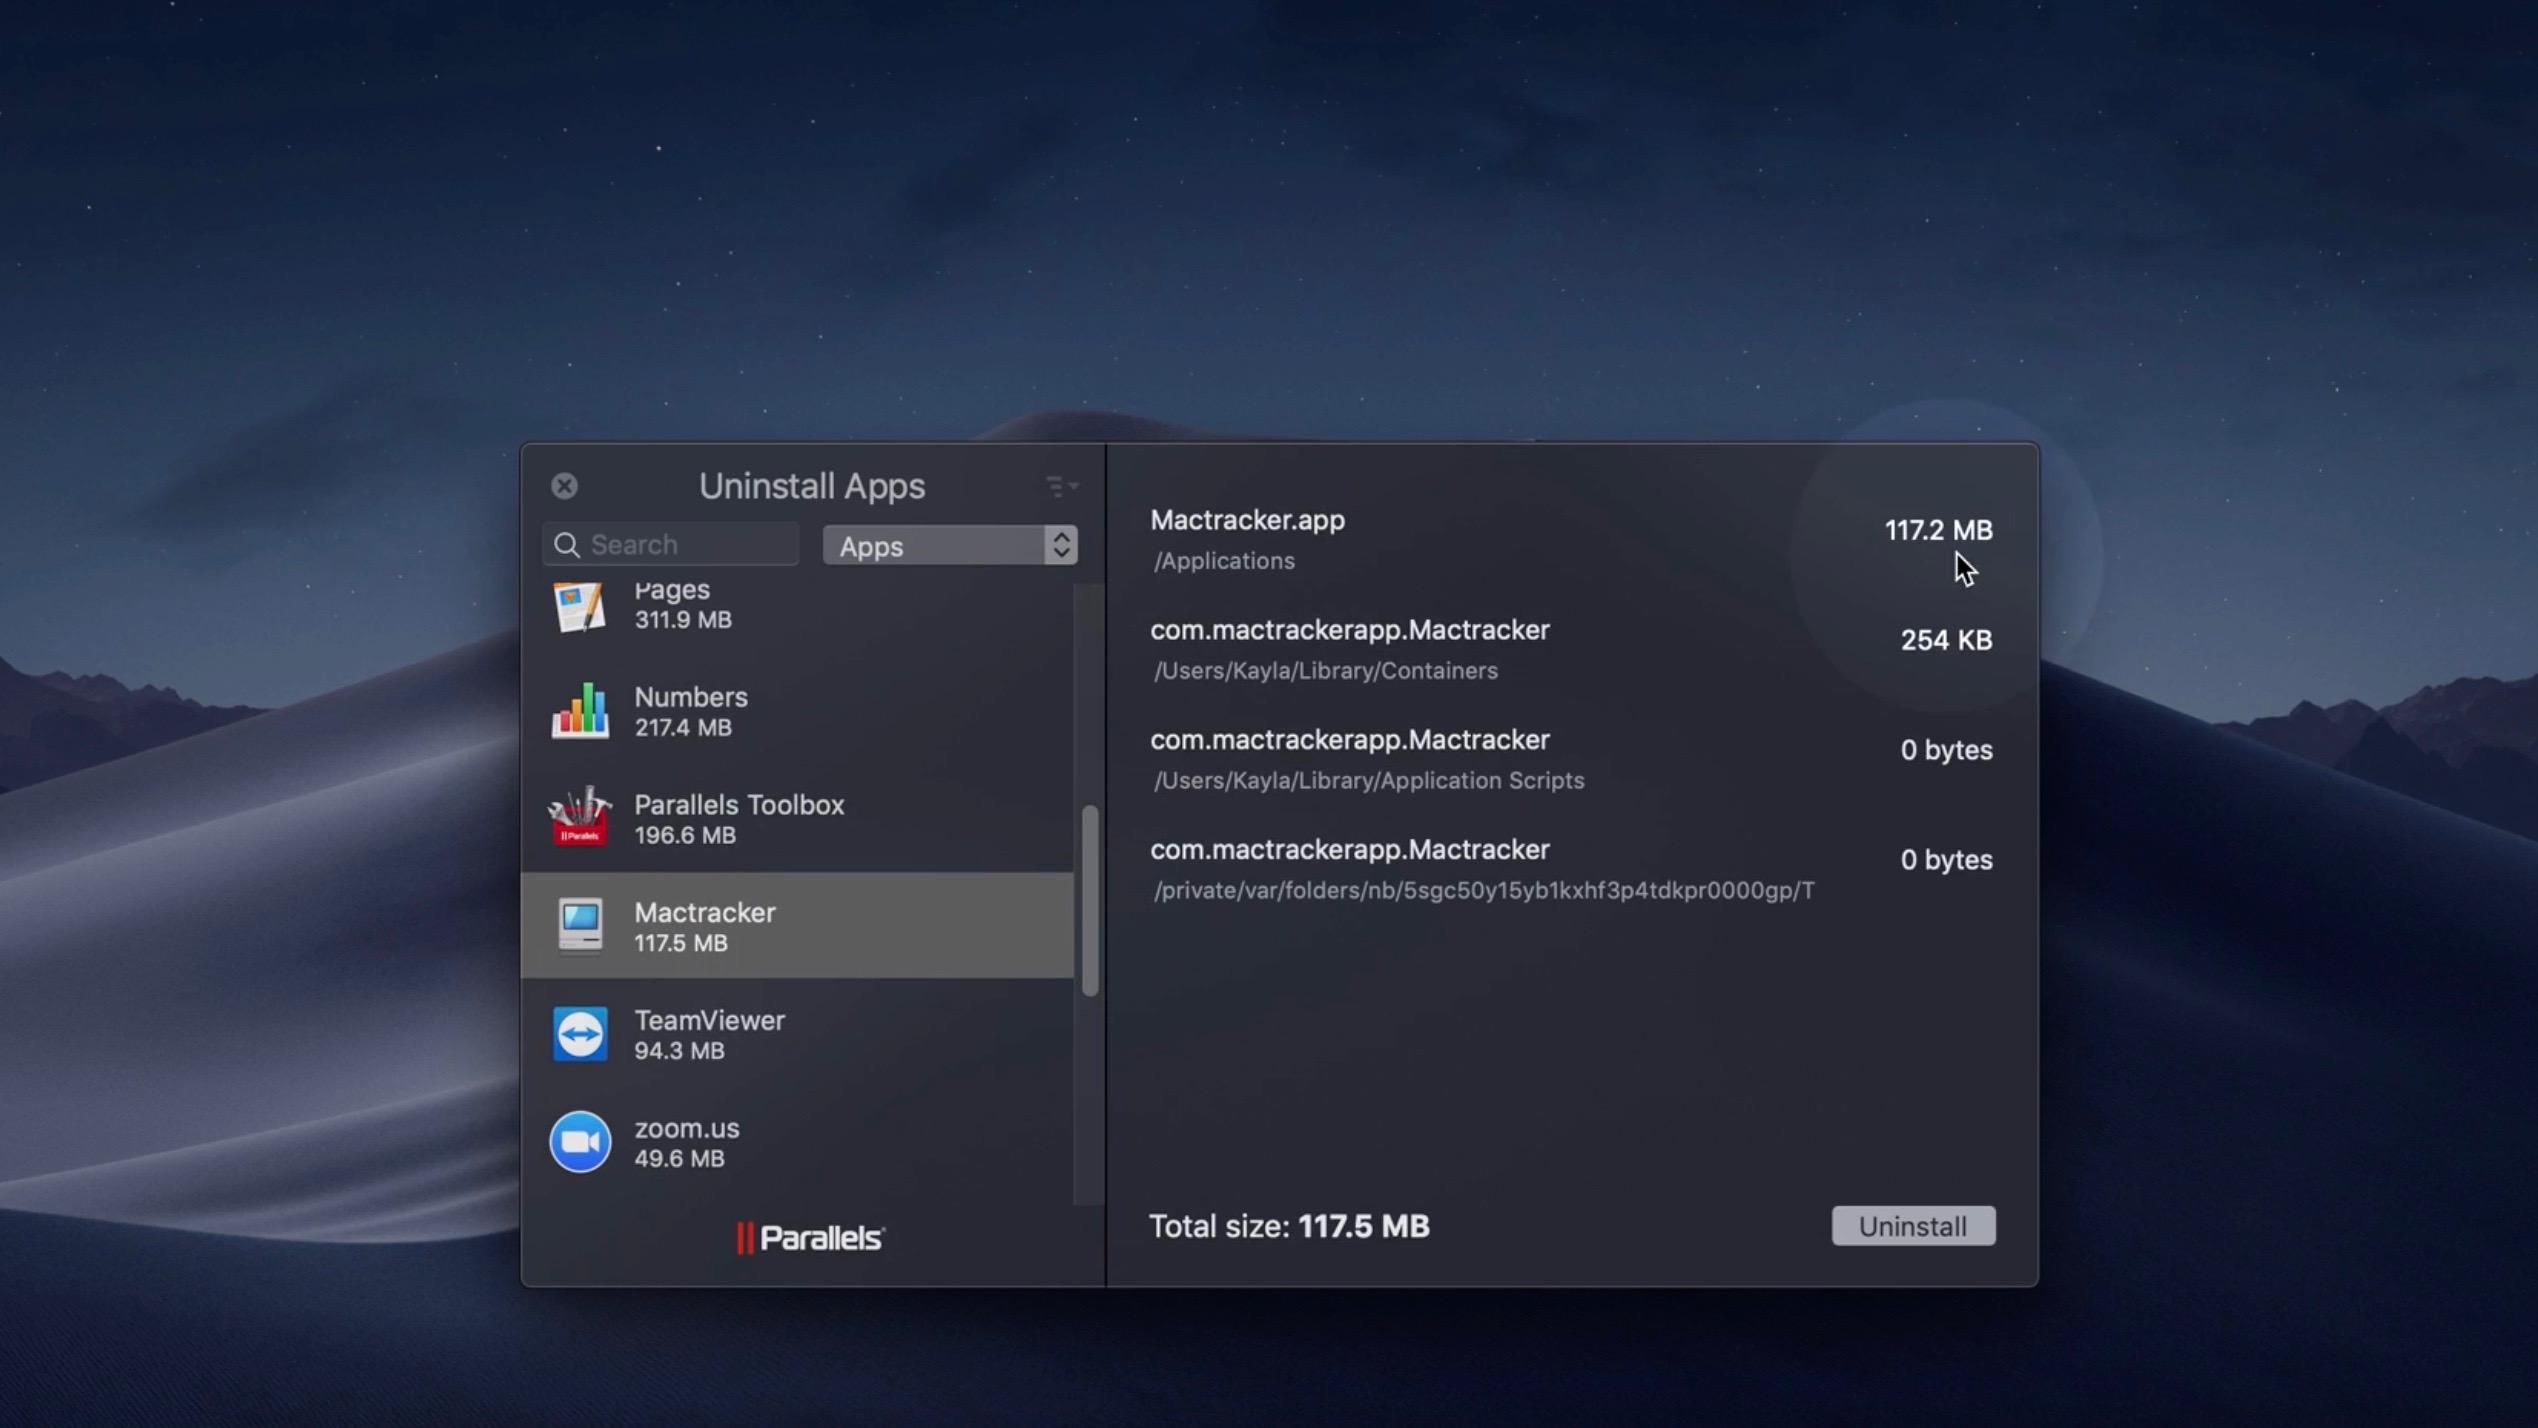 parallels toolbox for mac key